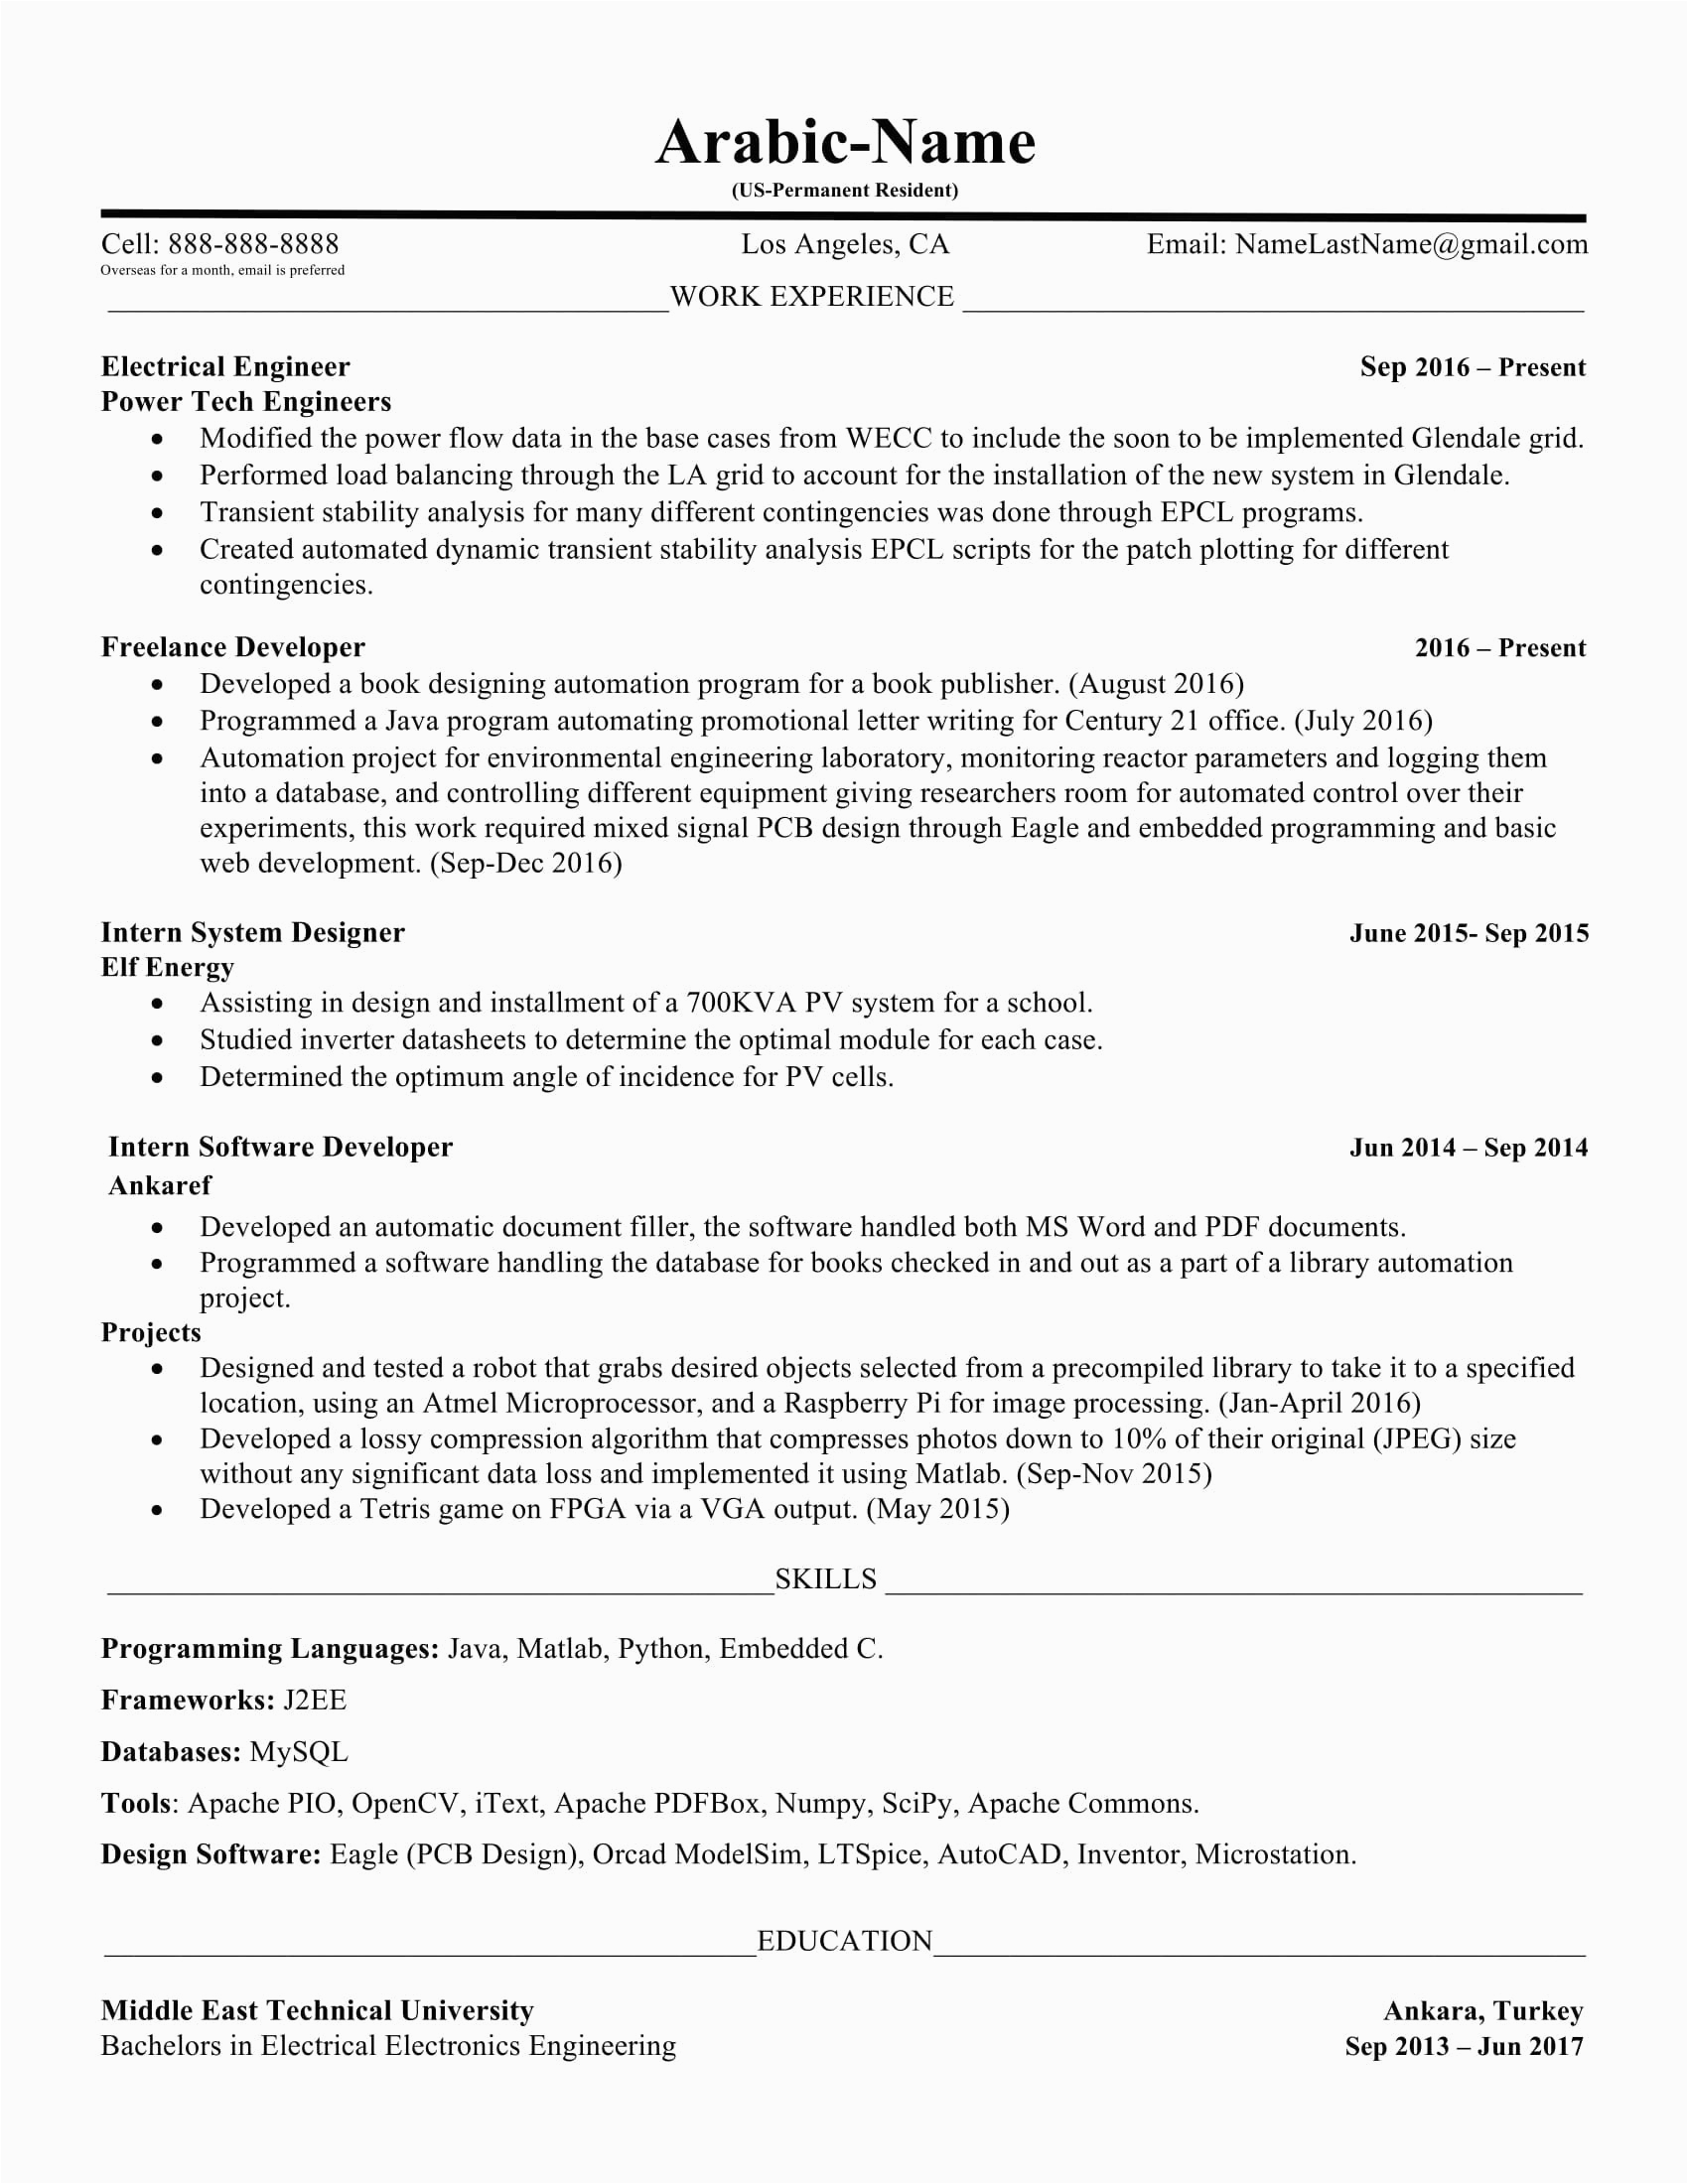 Sample Of Entry Level It Resume Entry Level Electrical Engineer Resume Resumes